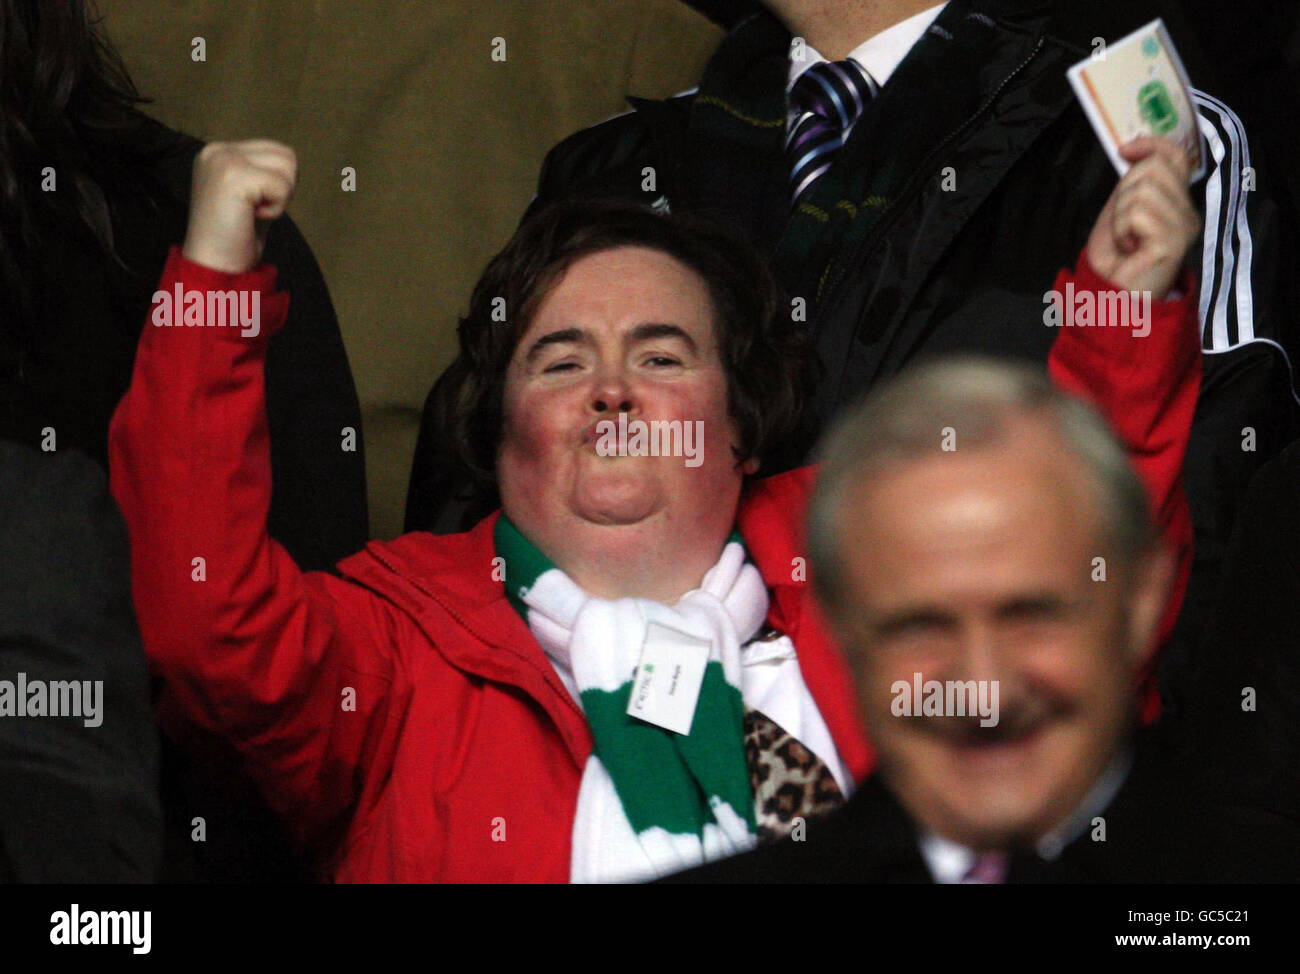 Britain's Got Talent contestant Susan Boyle in the crowd for the UEFA Europa League Group Match at Celtic Park, Glasgow. Stock Photo